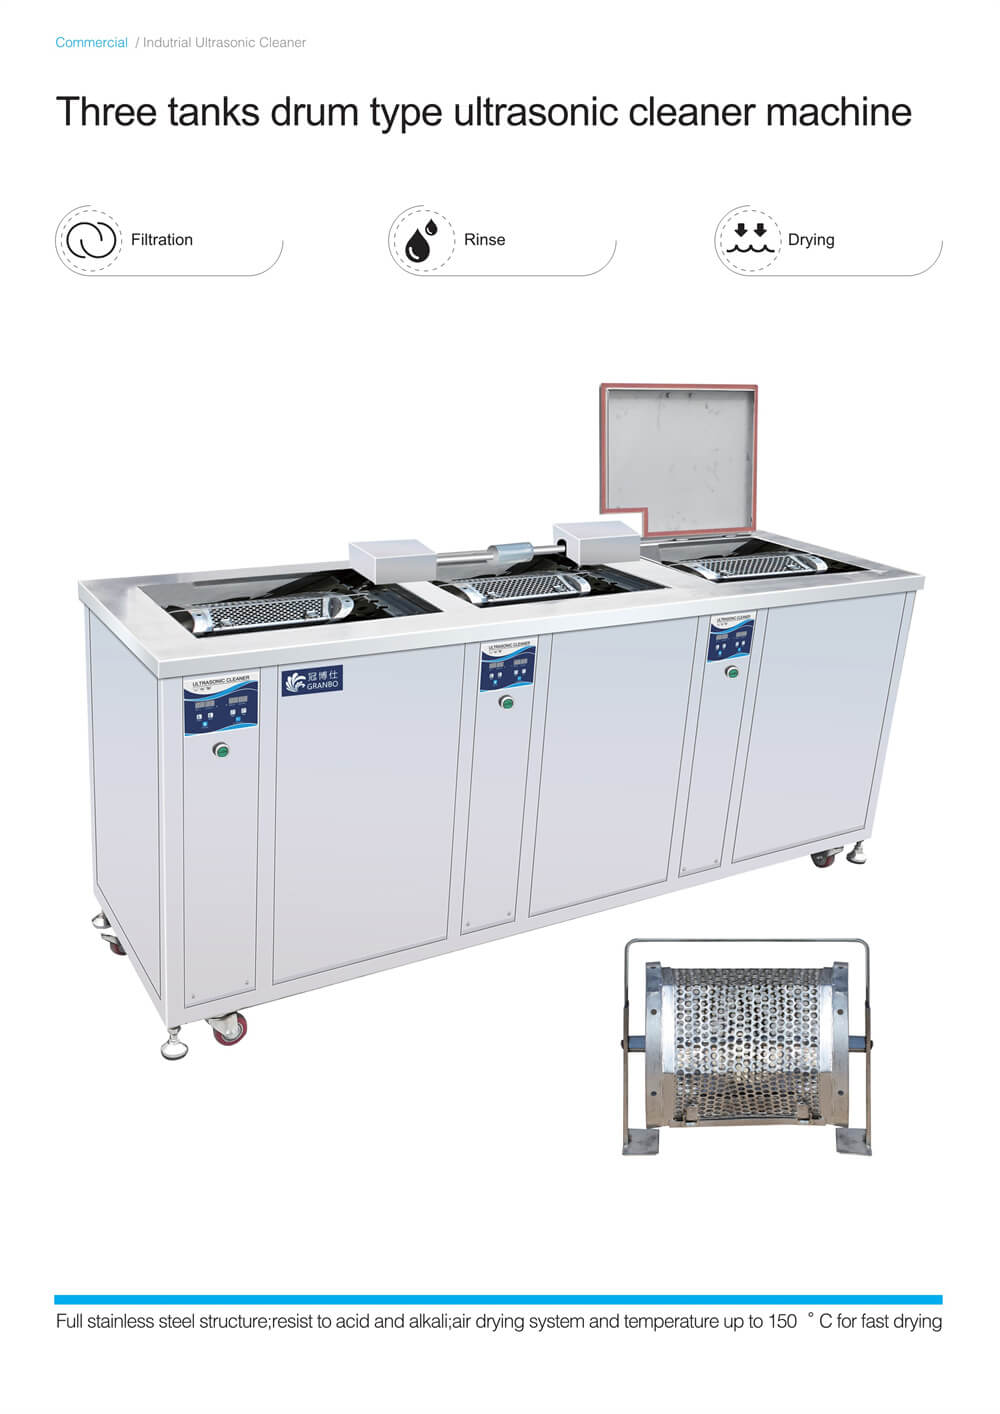 Automated Multi-Tank Ultrasonic Cleaner